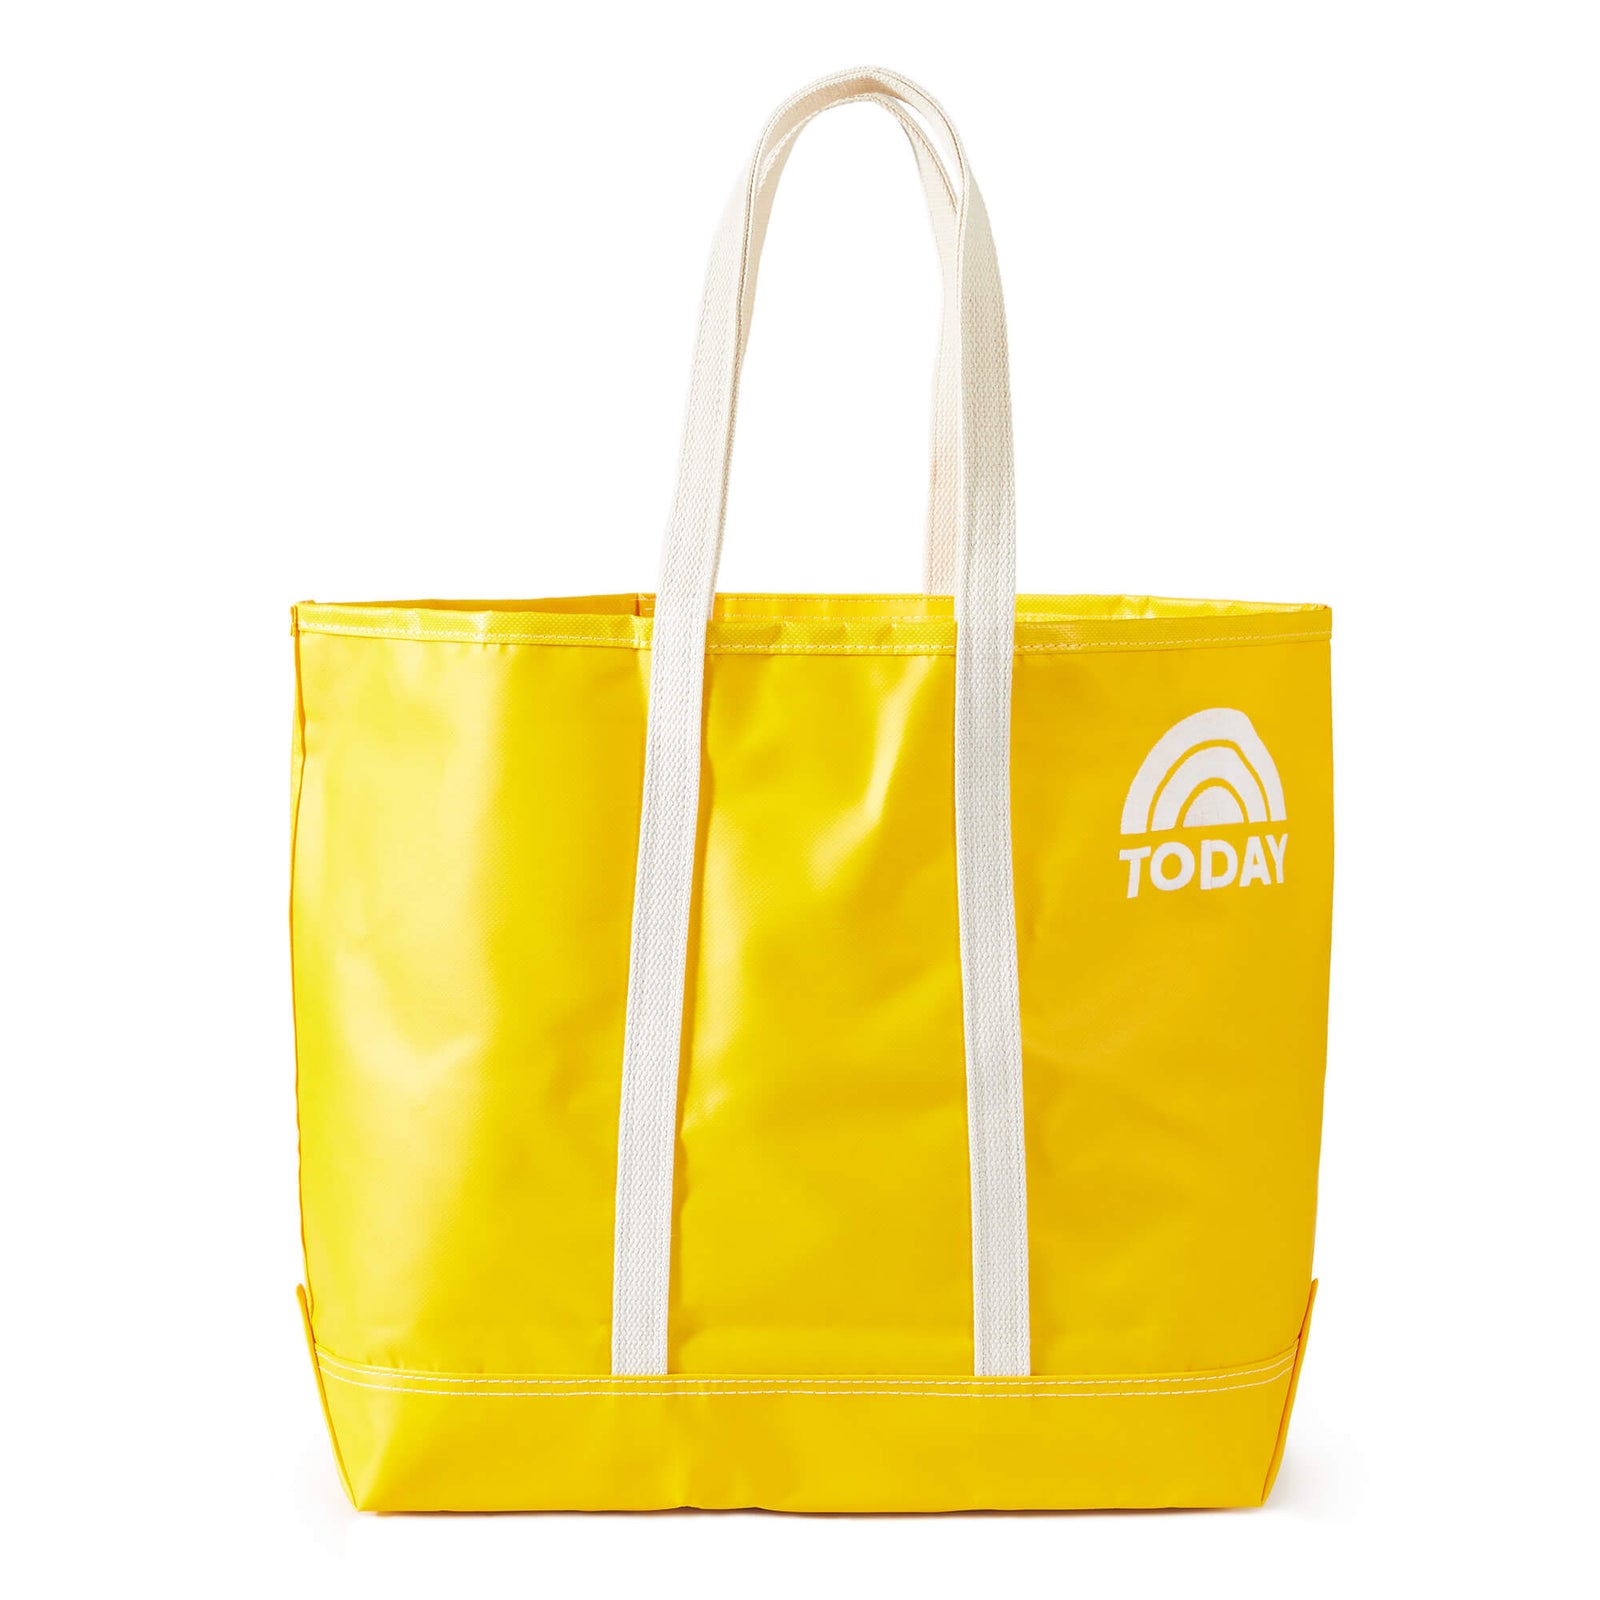 Today Show x Mark & Graham Large Tote